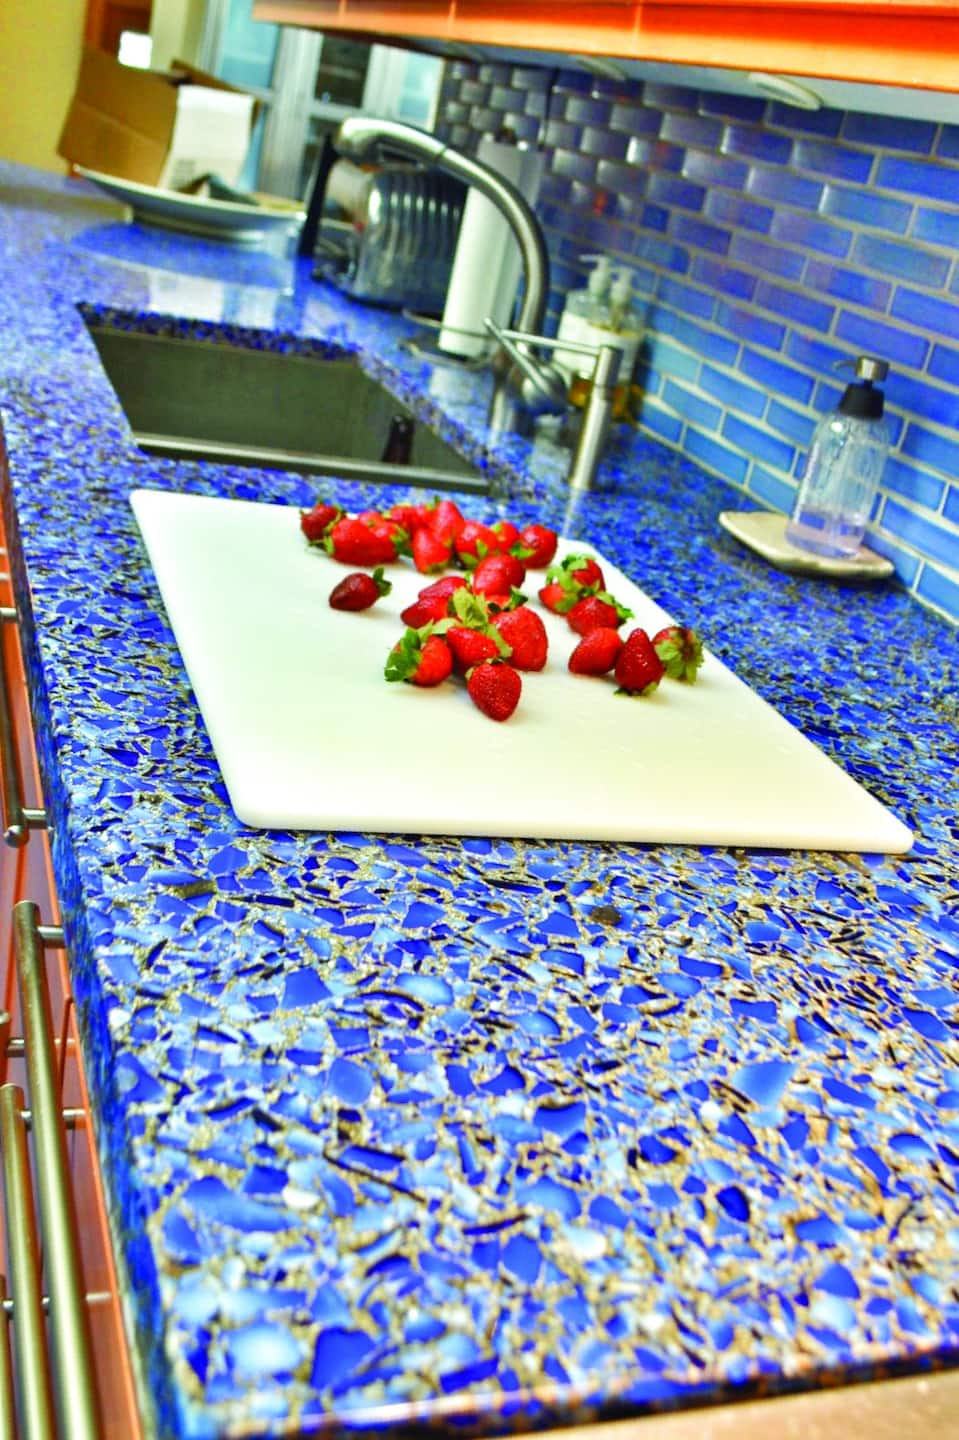 Recycled Glass Kitchen Countertops
 Unique Kitchen Countertops